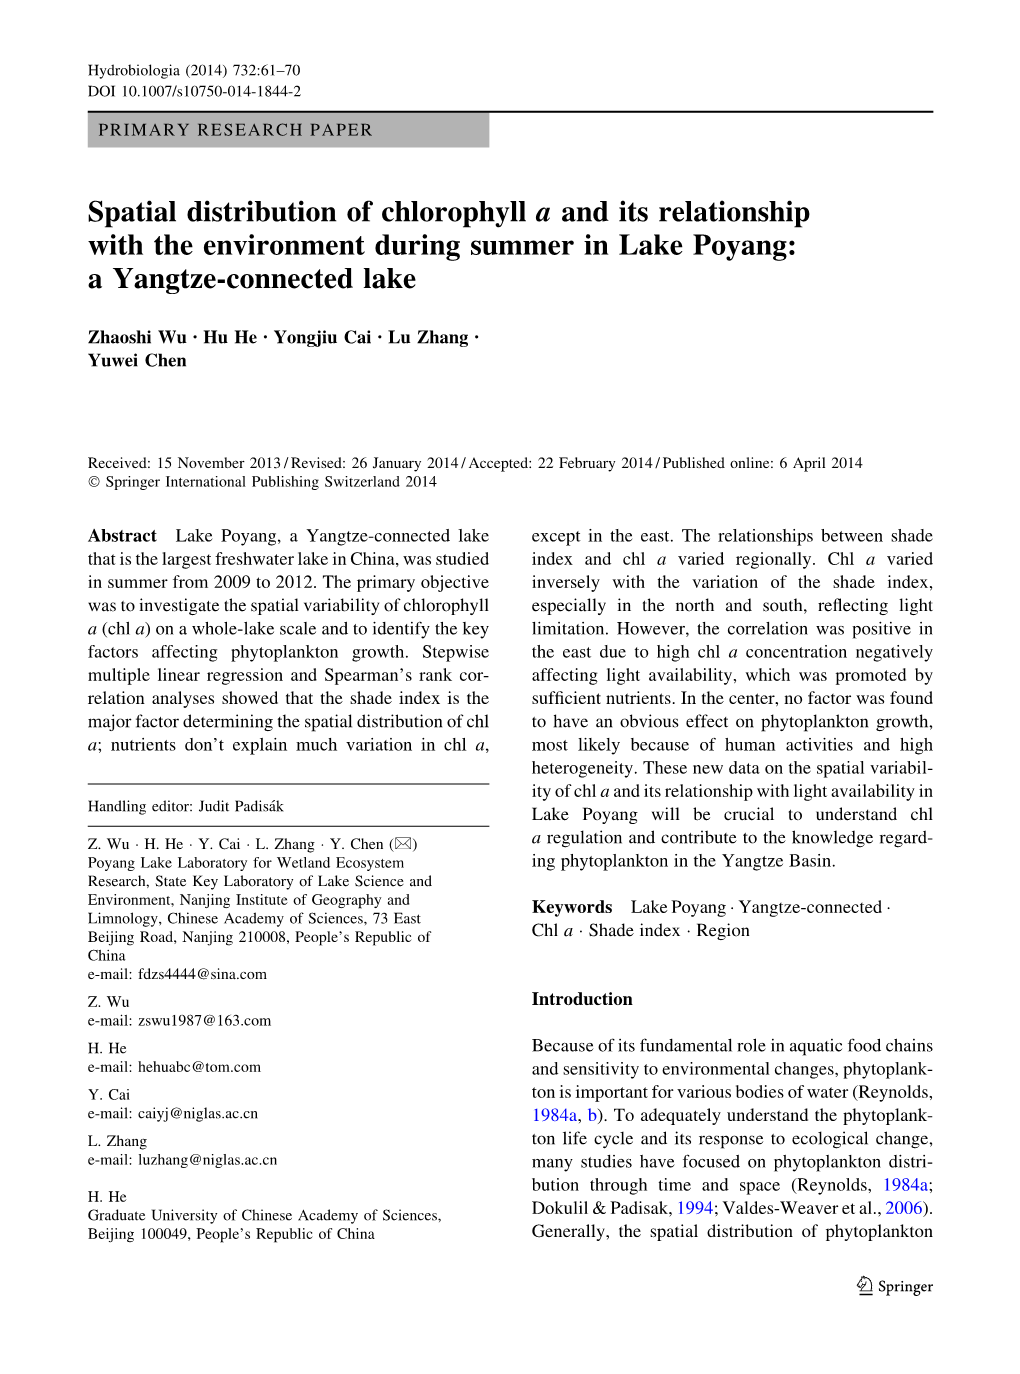 Spatial Distribution of Chlorophyll a and Its Relationship with the Environment During Summer in Lake Poyang: a Yangtze-Connected Lake